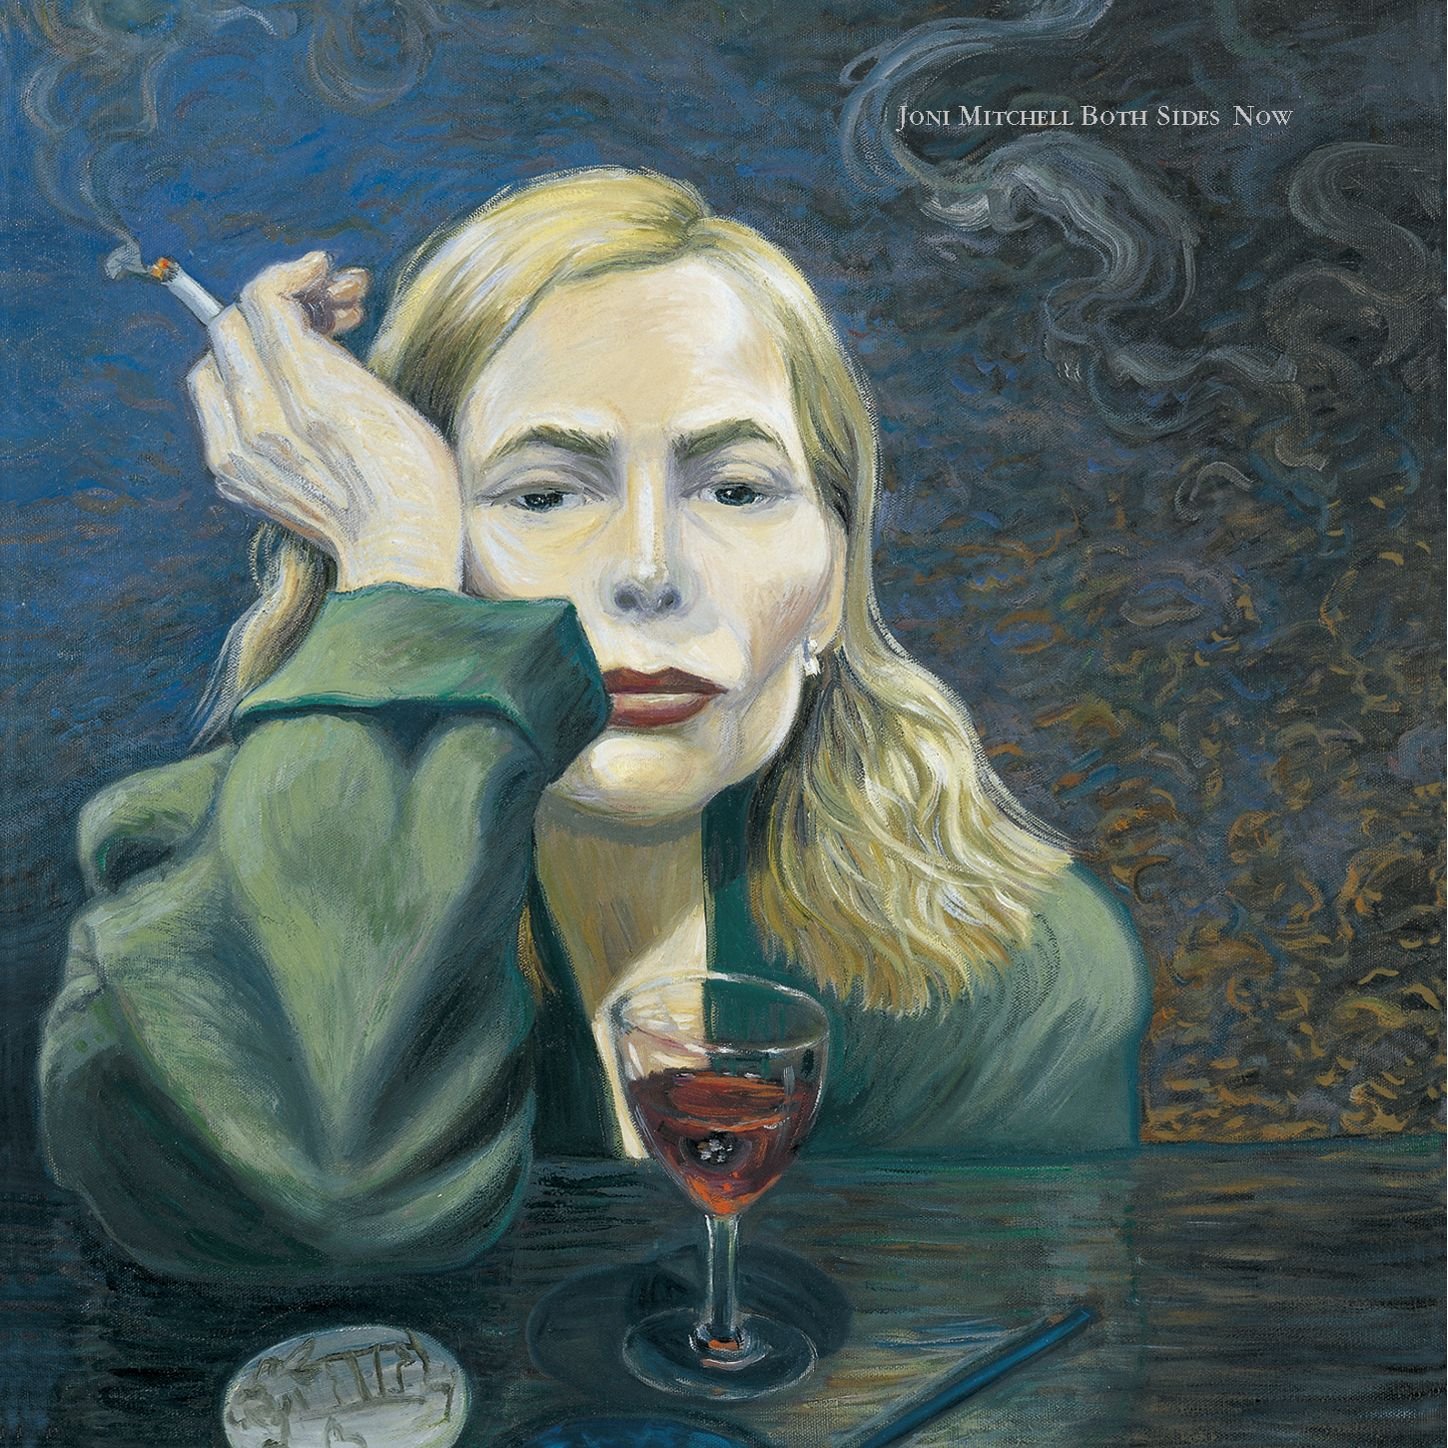 Joni Mitchell’s self-portrait featured in her 2000 album, “Both Sides Now”/Photo from the Amazon website